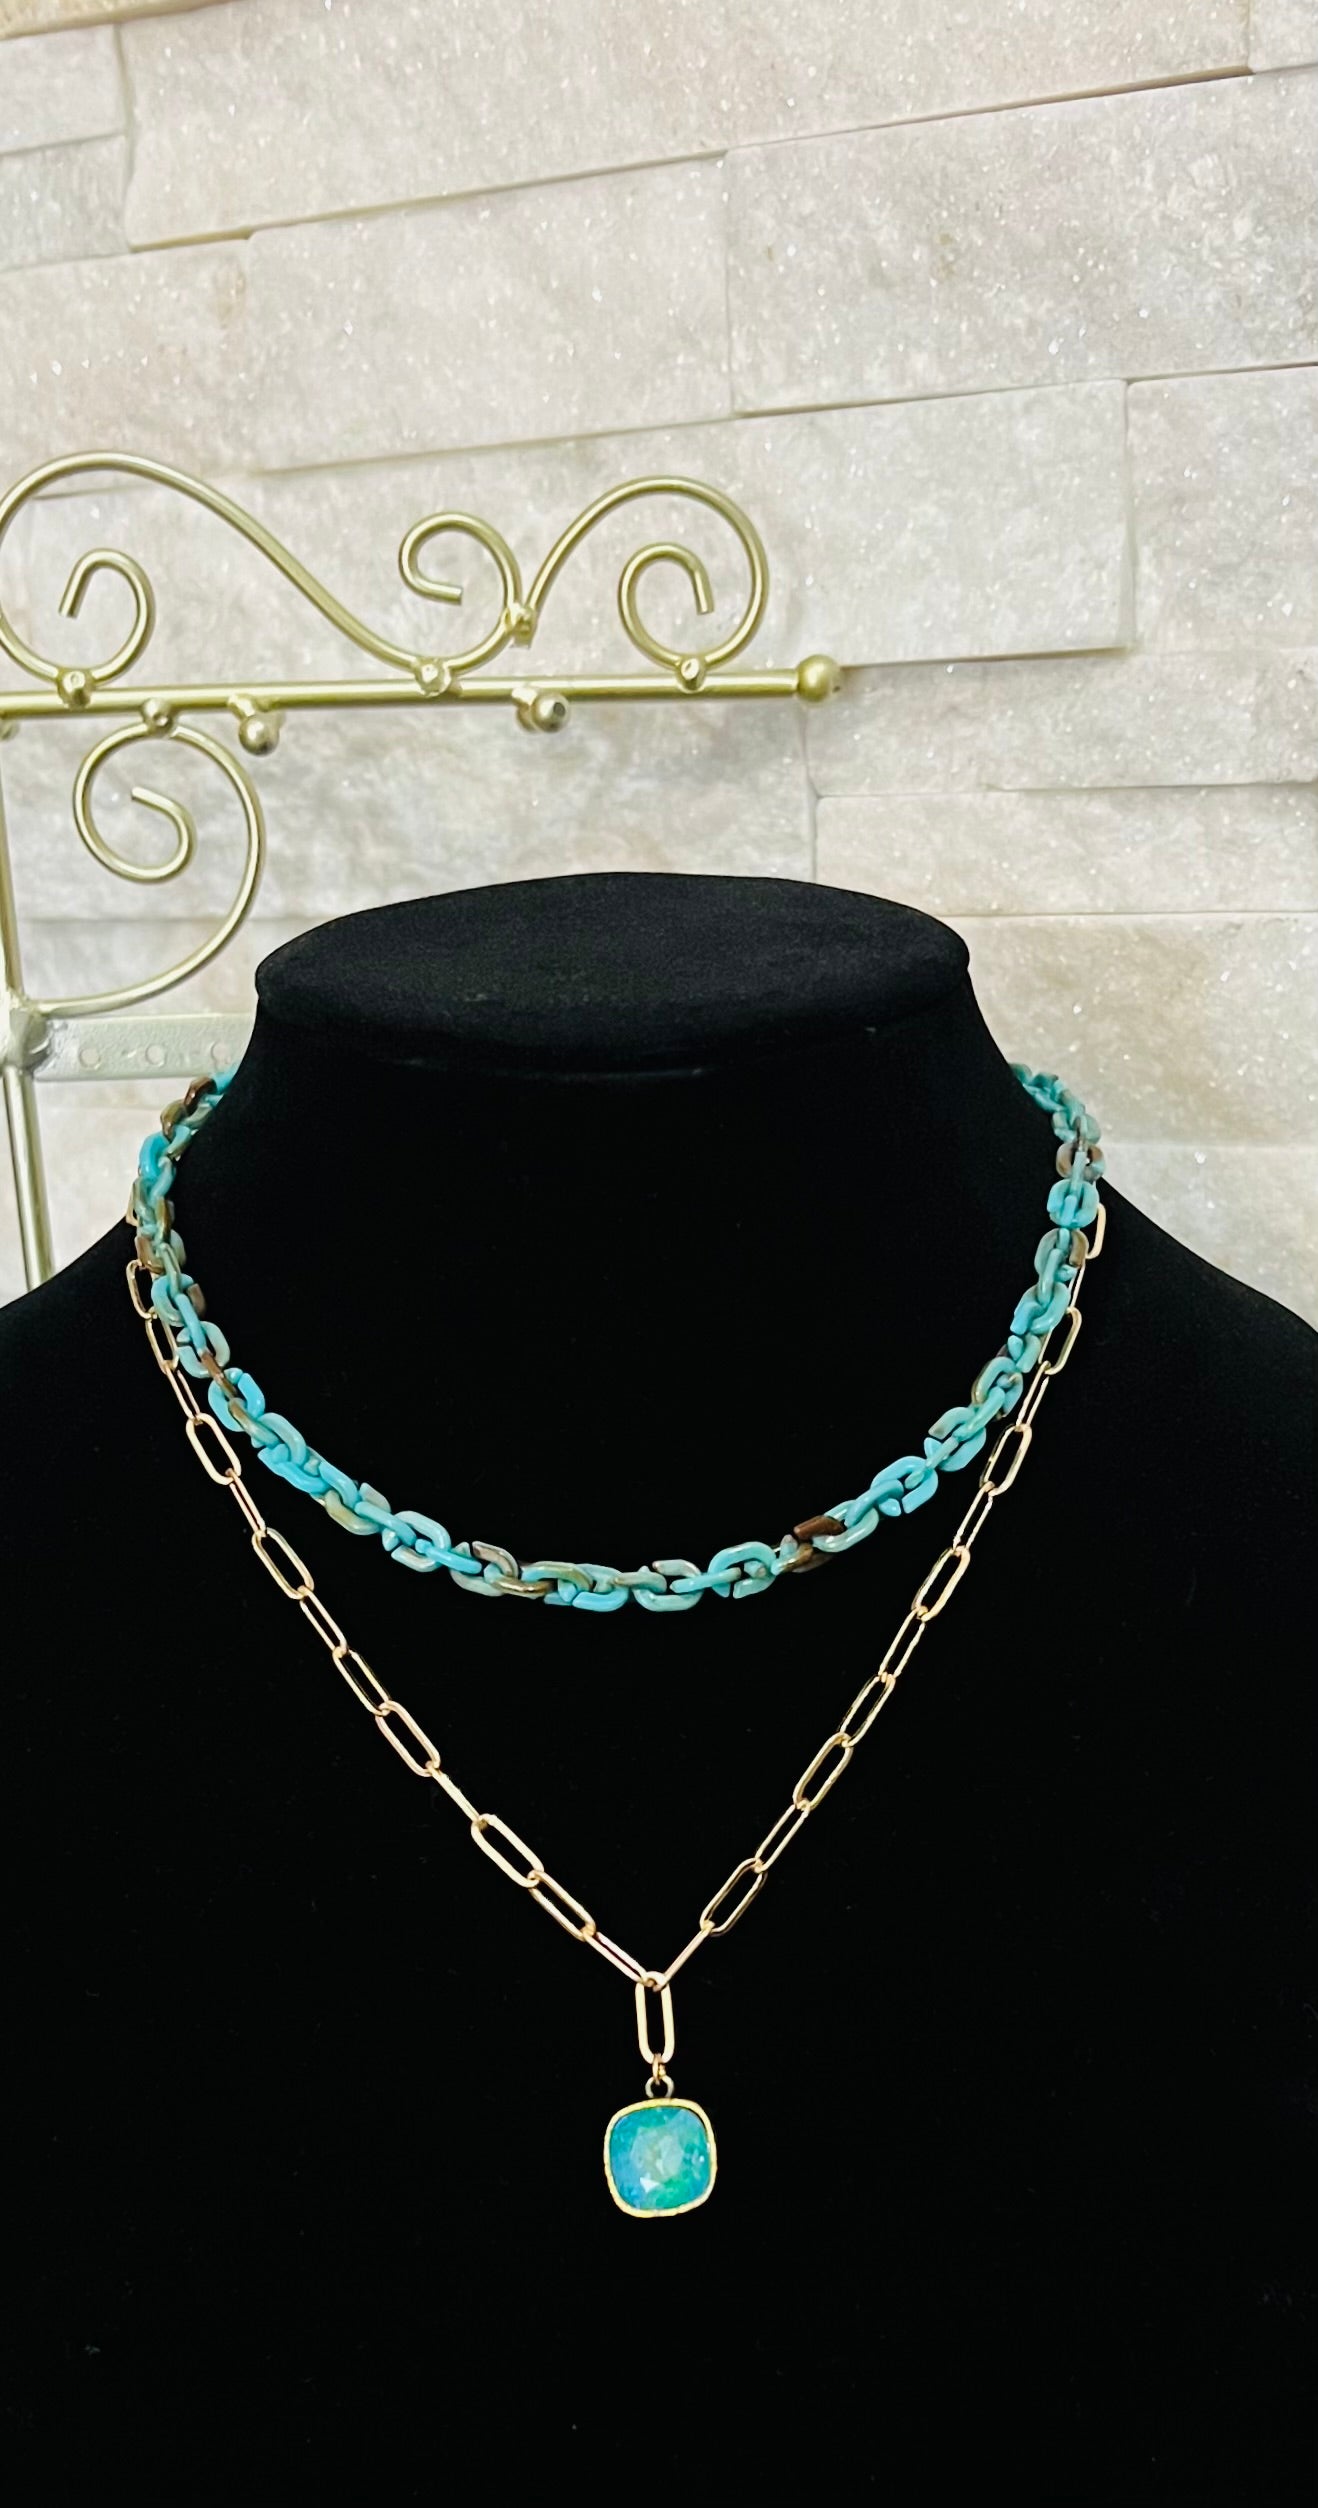 Two Strand Chain Necklace with Turquoise Cushion cut Crystal Drop in Gold and Turquoise